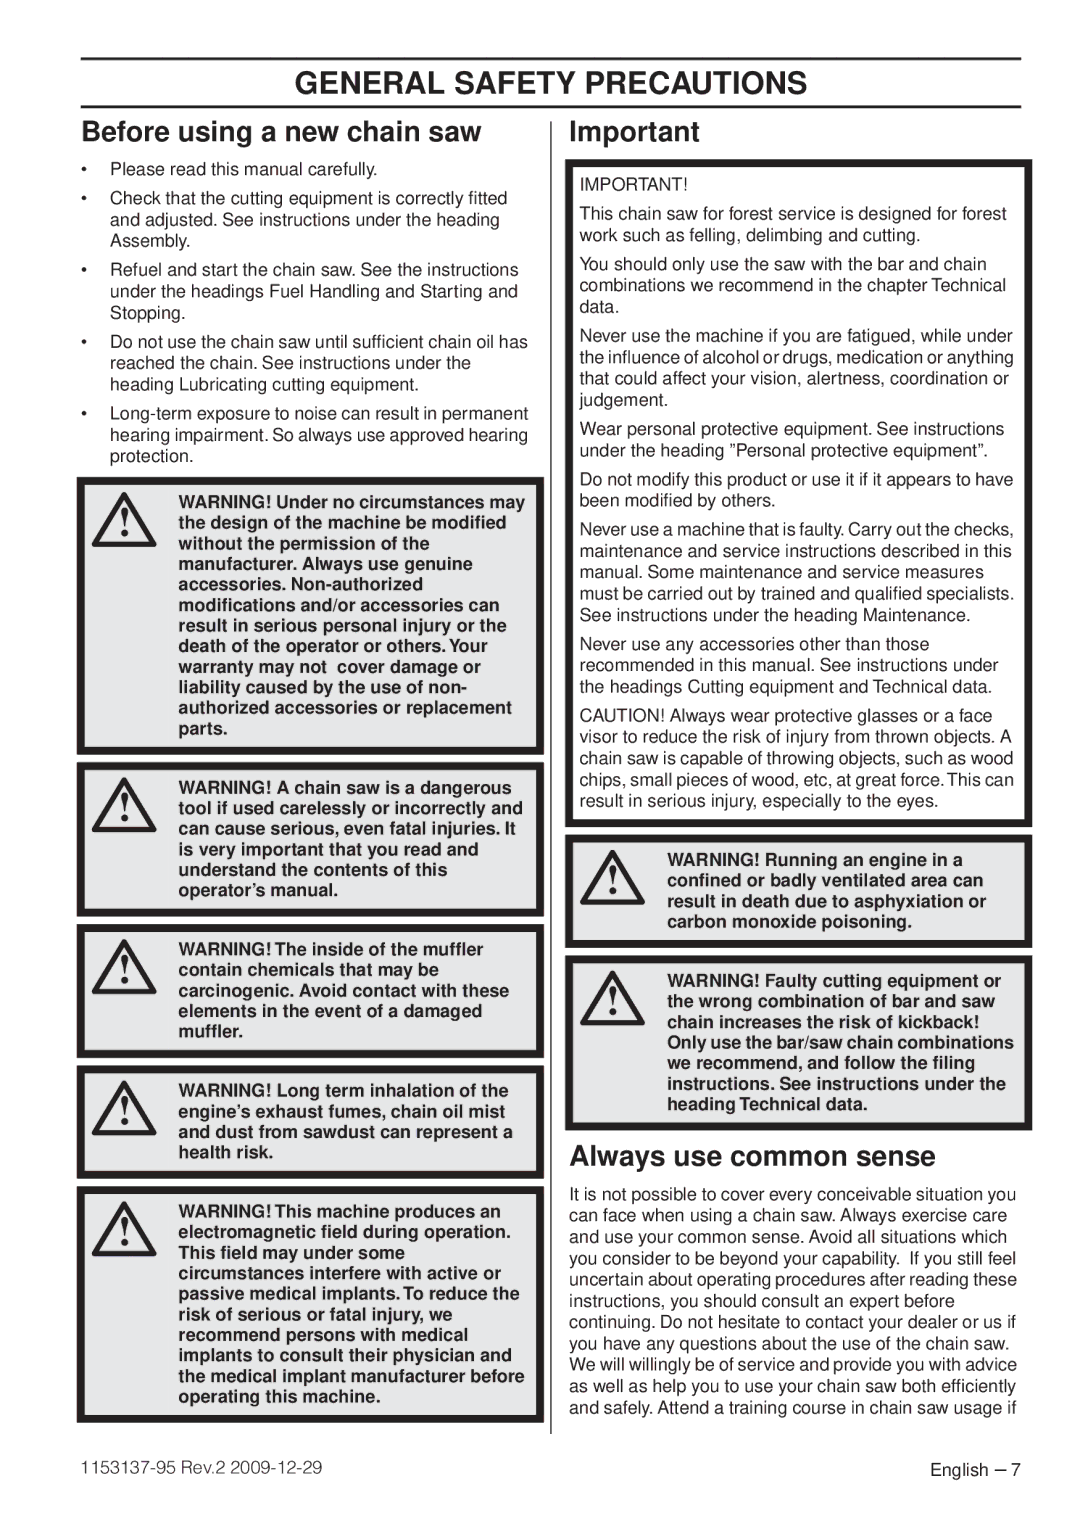 Husqvarna 1153137-95 manual General Safety Precautions, Before using a new chain saw, Always use common sense 